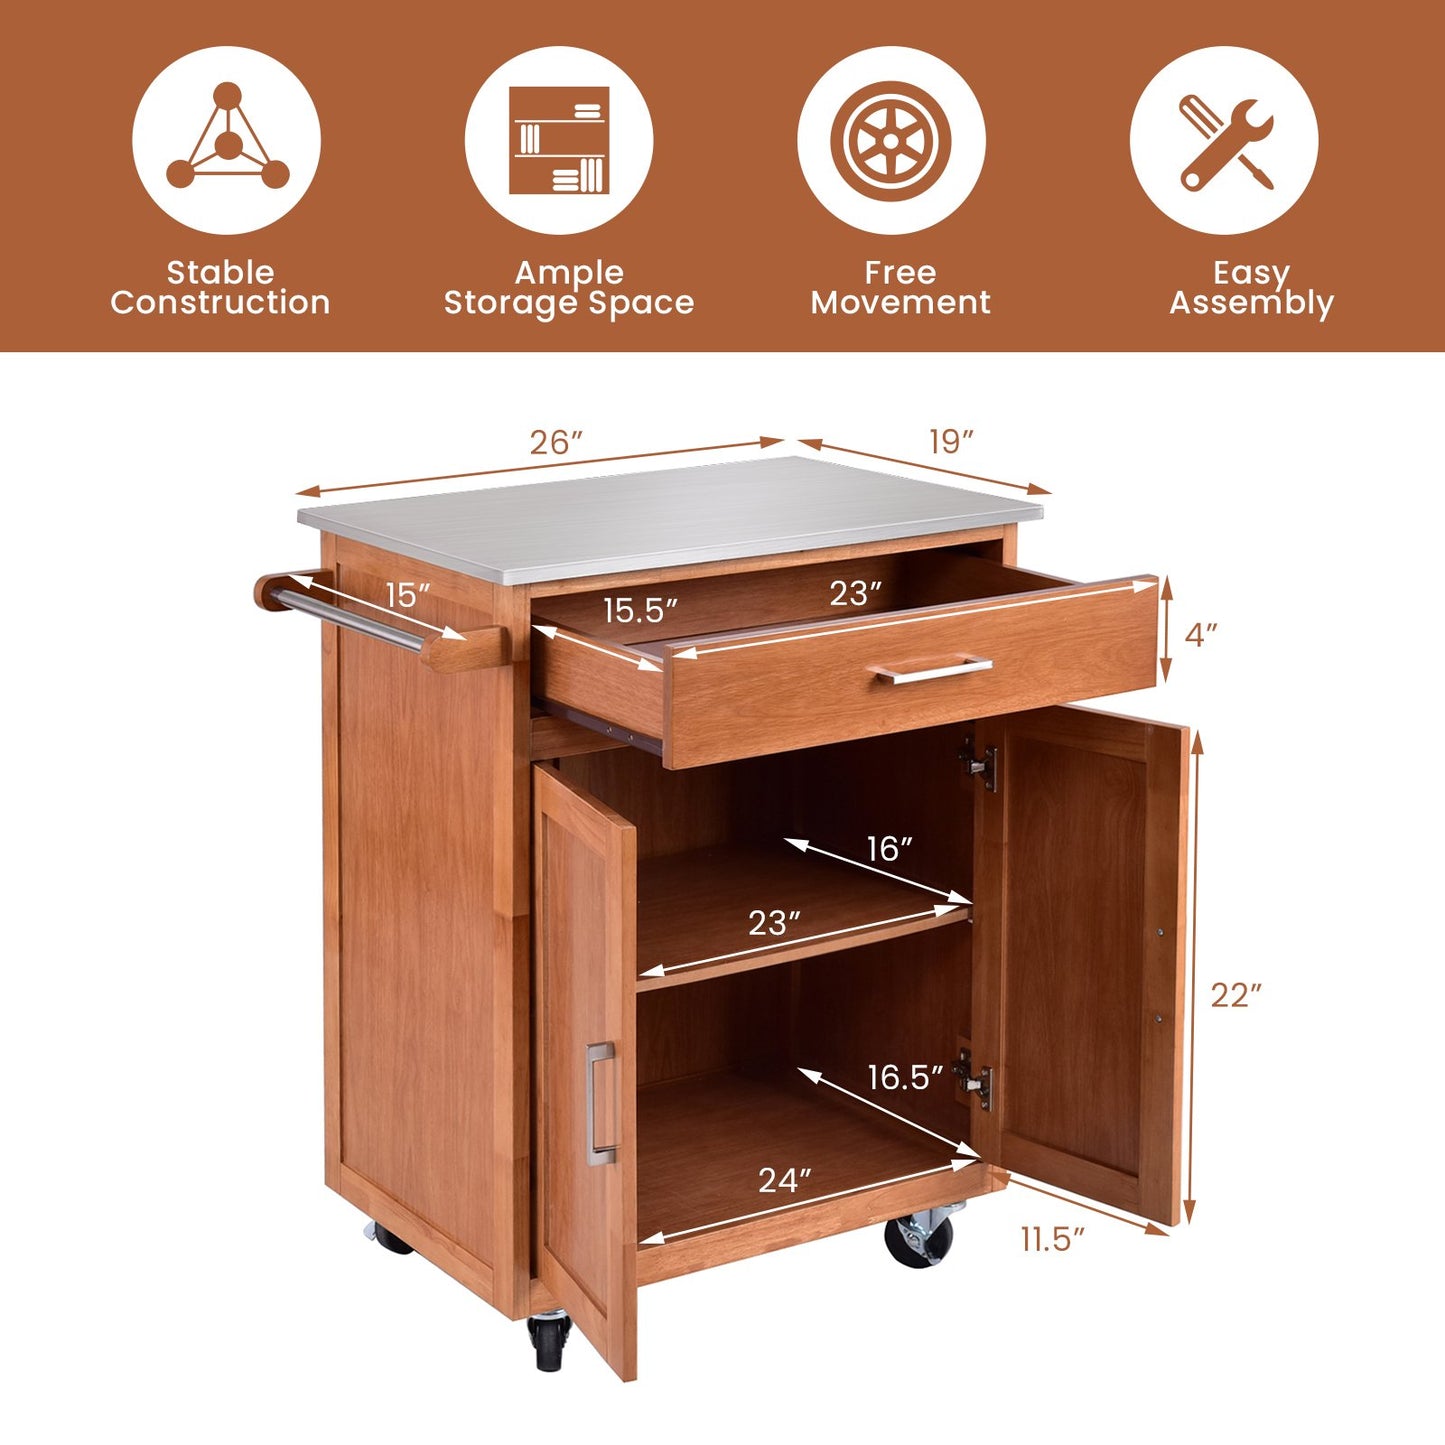 Wooden Kitchen Rolling Storage Cabinet with Stainless Steel Top, Brown - Gallery Canada